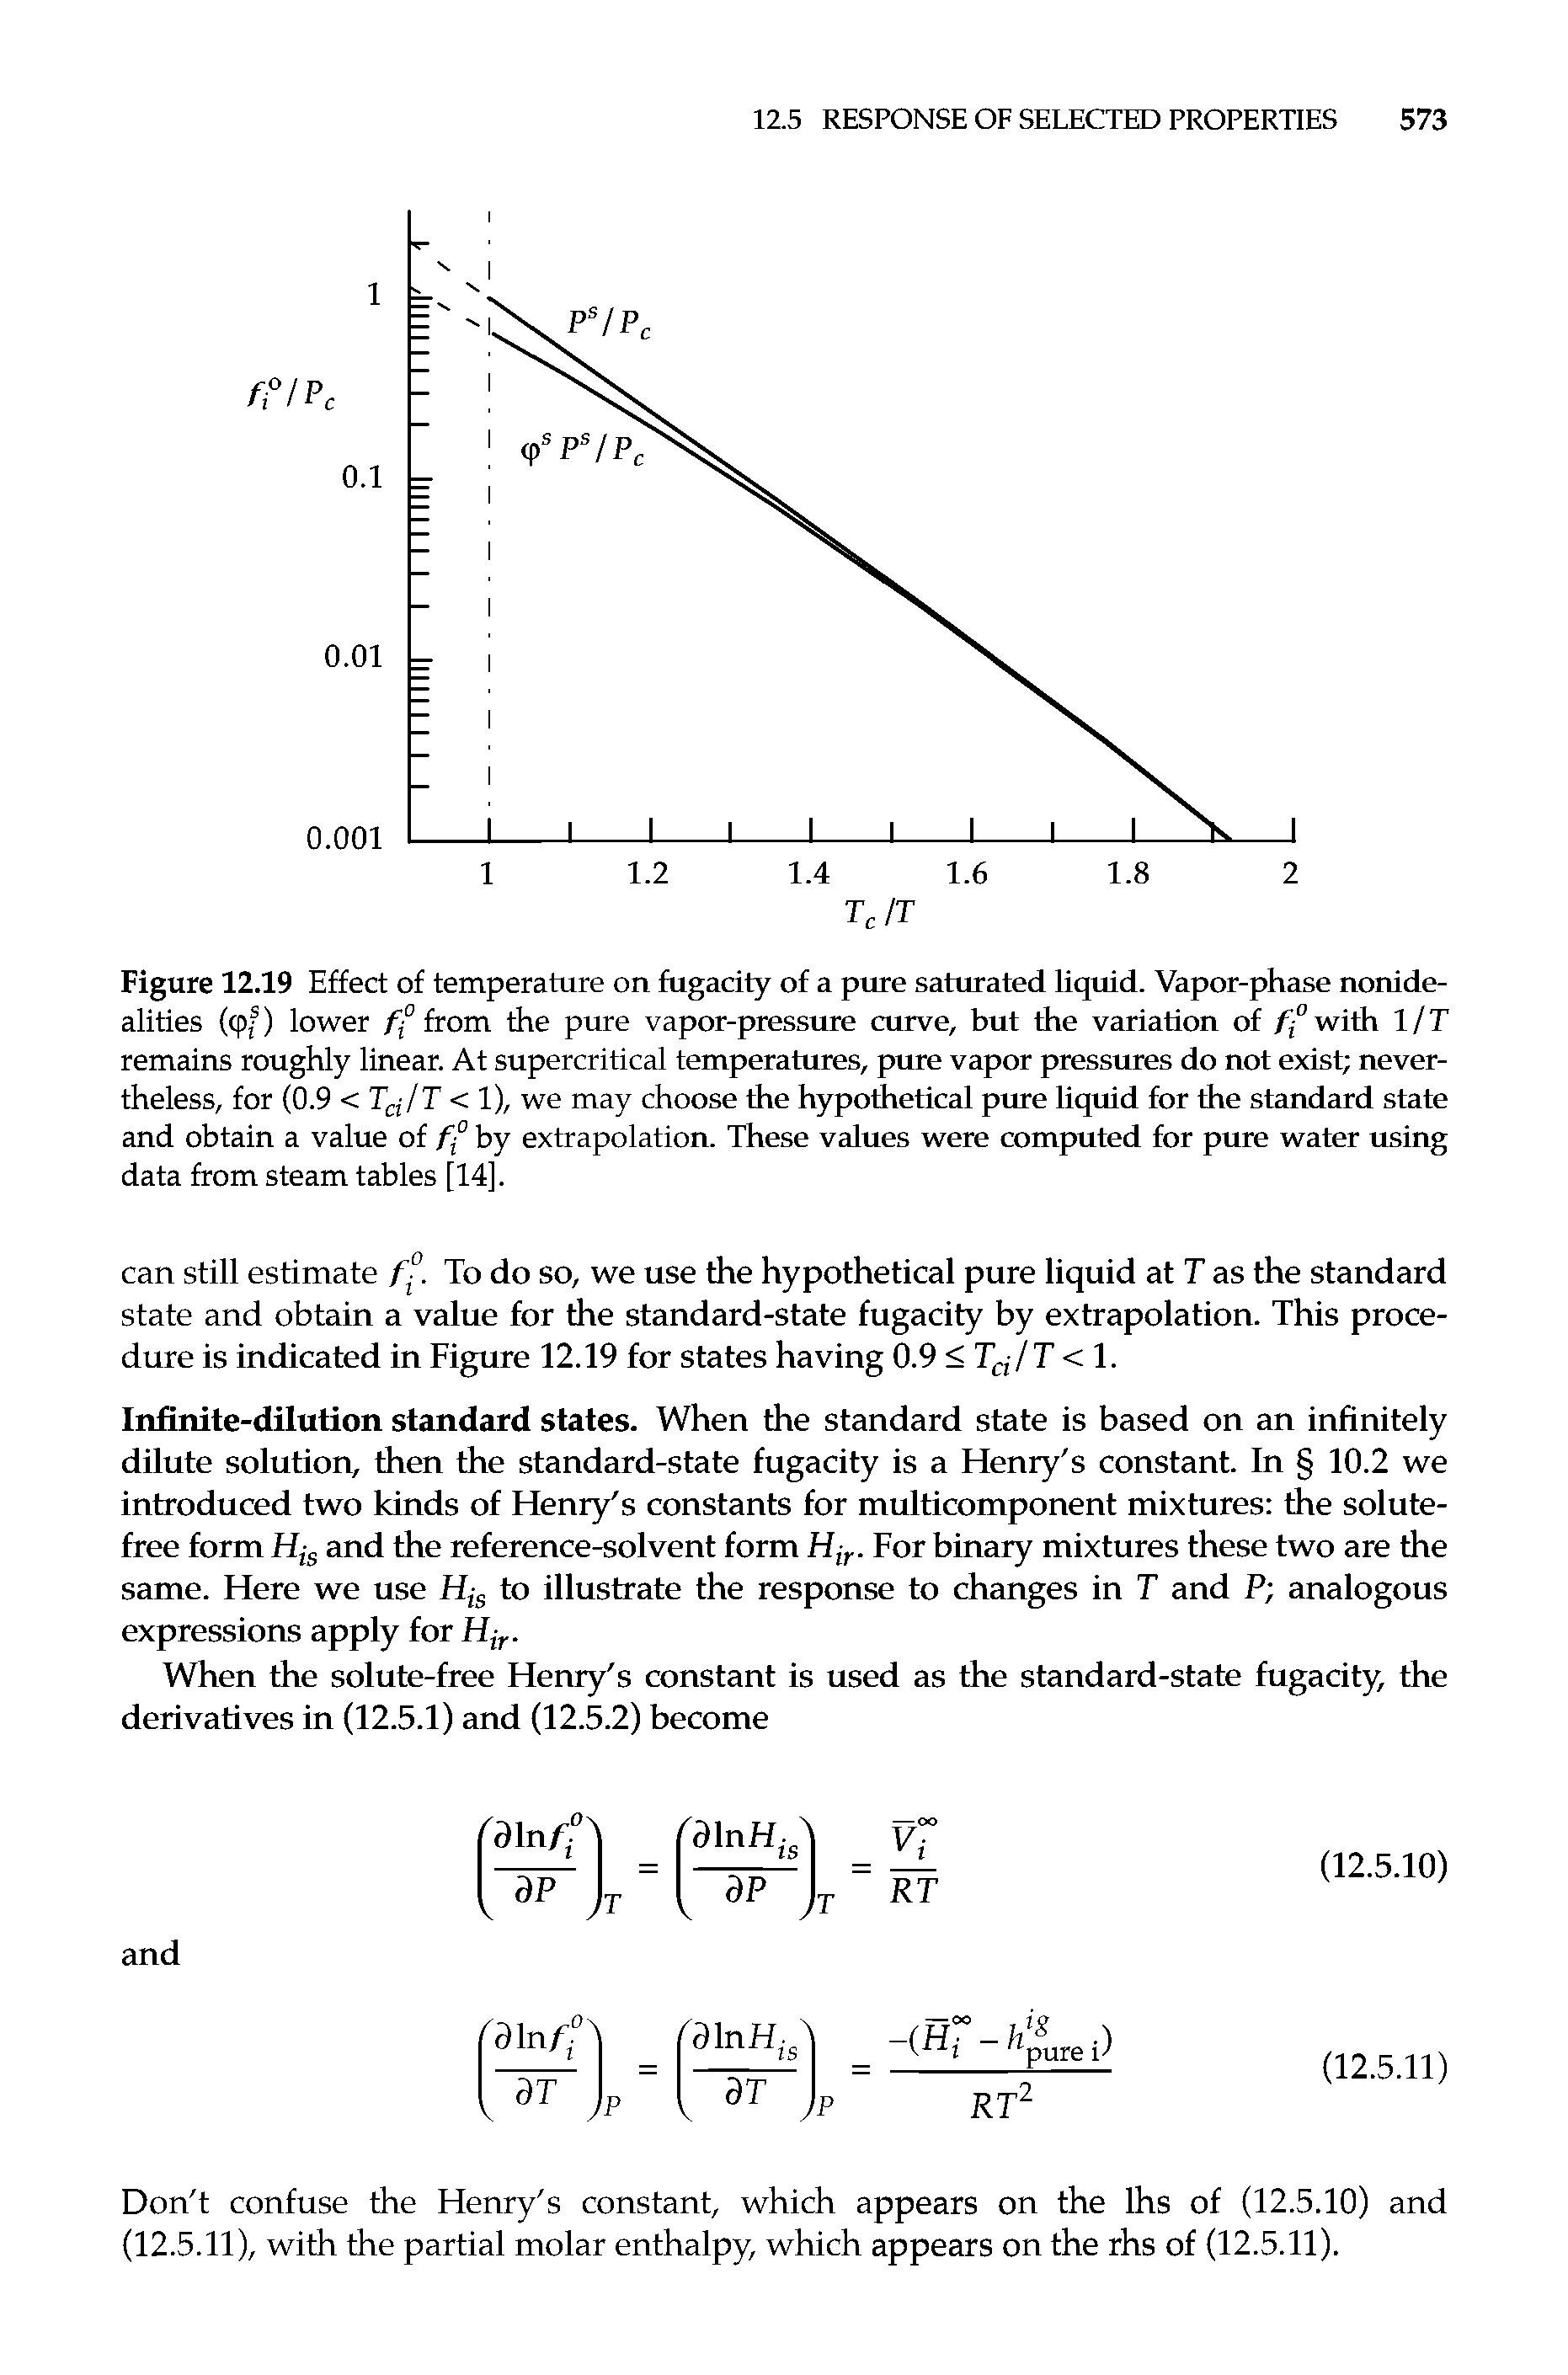 Figure 12.19 Effect of temperature on fugacity of a pure saturated liquid. Vapor-phase nonidealities (cpf) lower from the pure vapor-pressure curve, but the variation of /j-"with 1/T remains roughly linear. At supercritical temperatures, jnue vapor pressures do not exist nevertheless, for (0.9 < r /T < 1), we may choose the hypothetical pure liquid for the standard state and obtain a value of f° by extrapolation. These values were comjnited for pure water using data from steam tables [14].